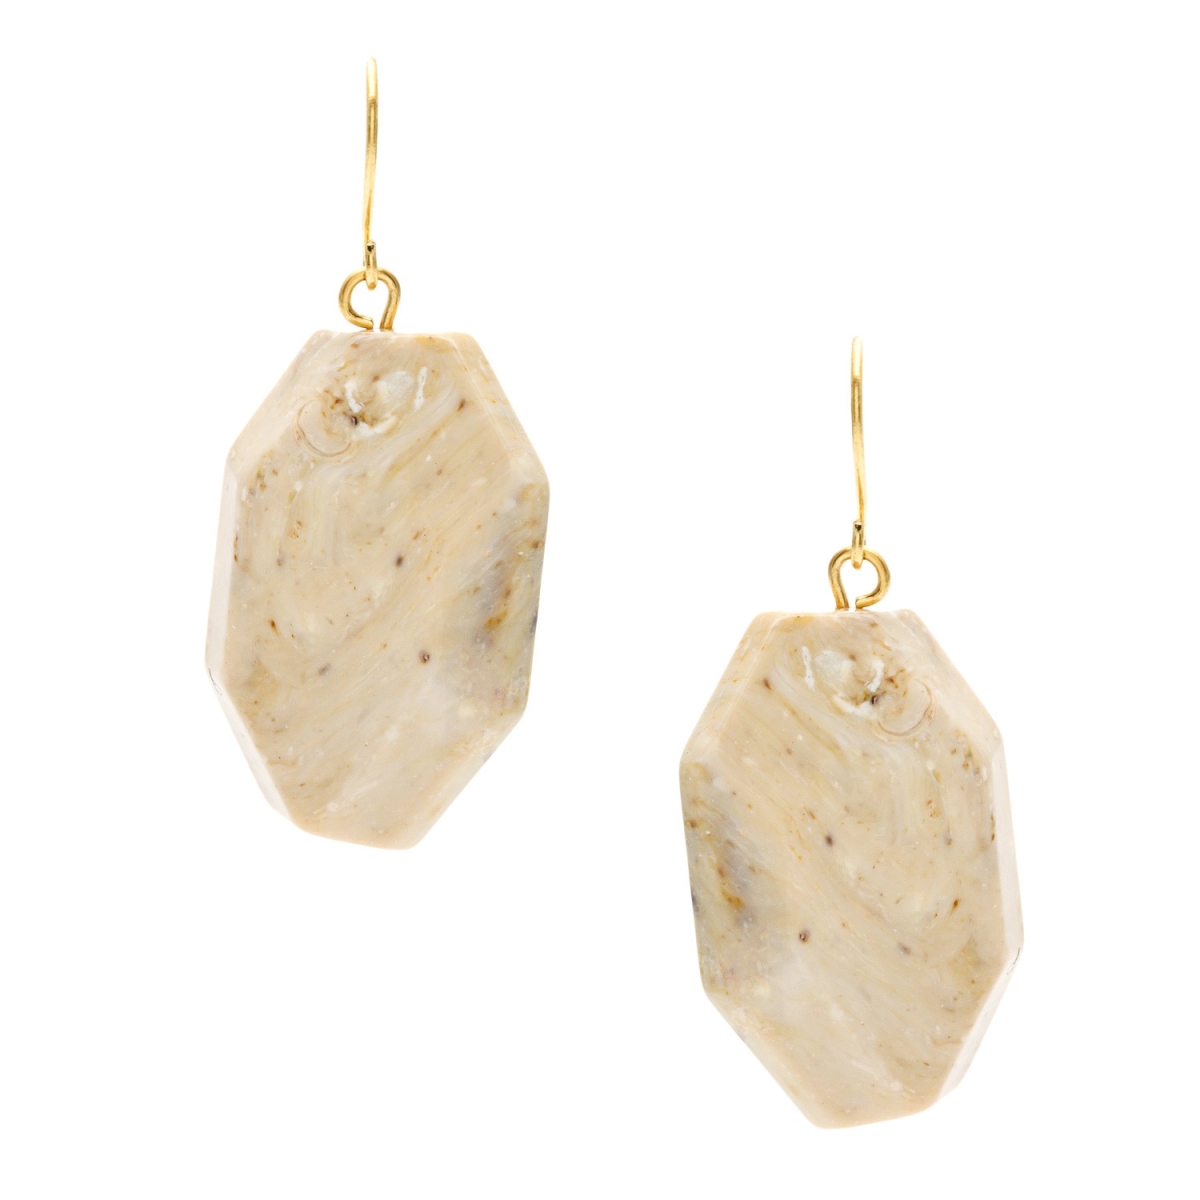 Picture of Alexa Starr 4297/E Goldtone Lucite Nugget Drop Earrings - Cream